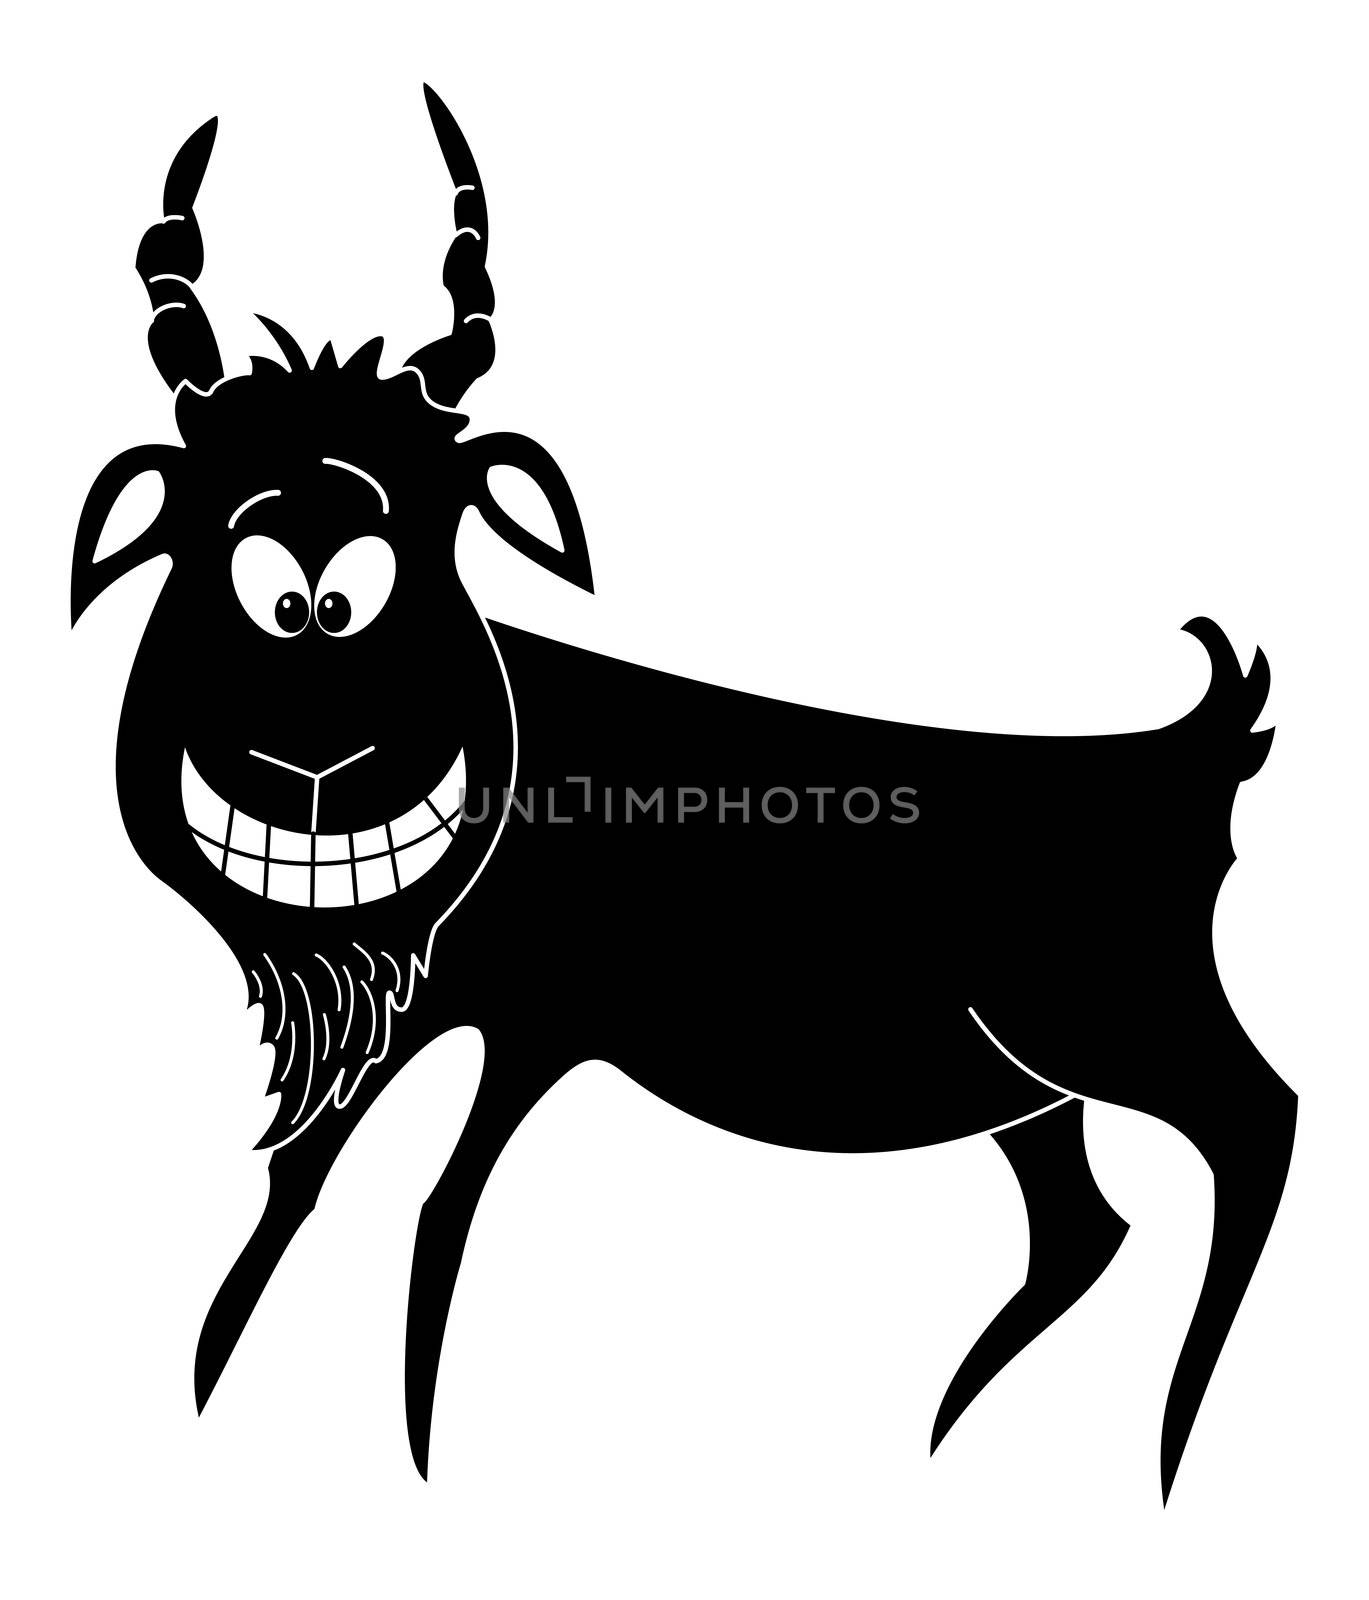 Cheerful goat, black silhouette by alexcoolok